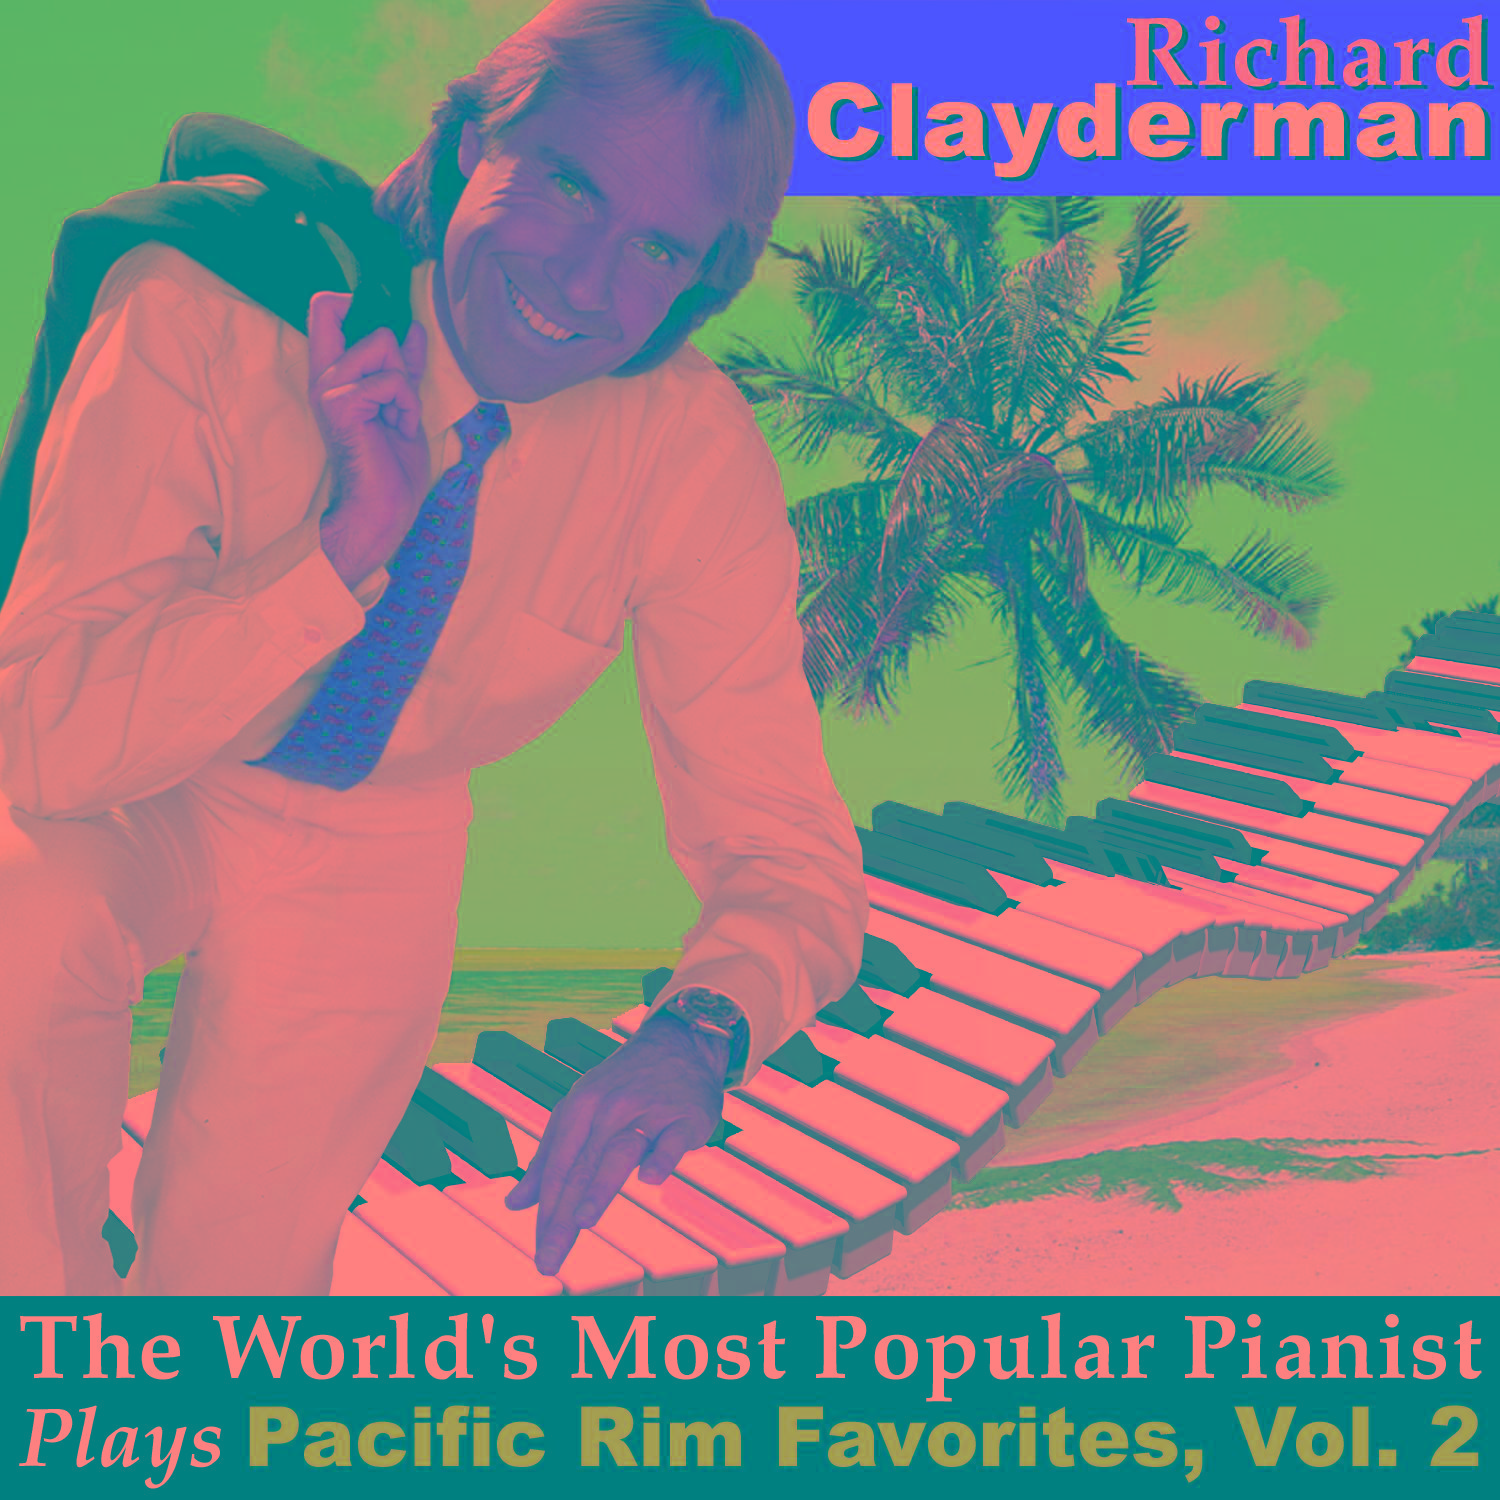 The World's Most Popular Pianist Plays Pacific Rim Favorites, Vol. 2